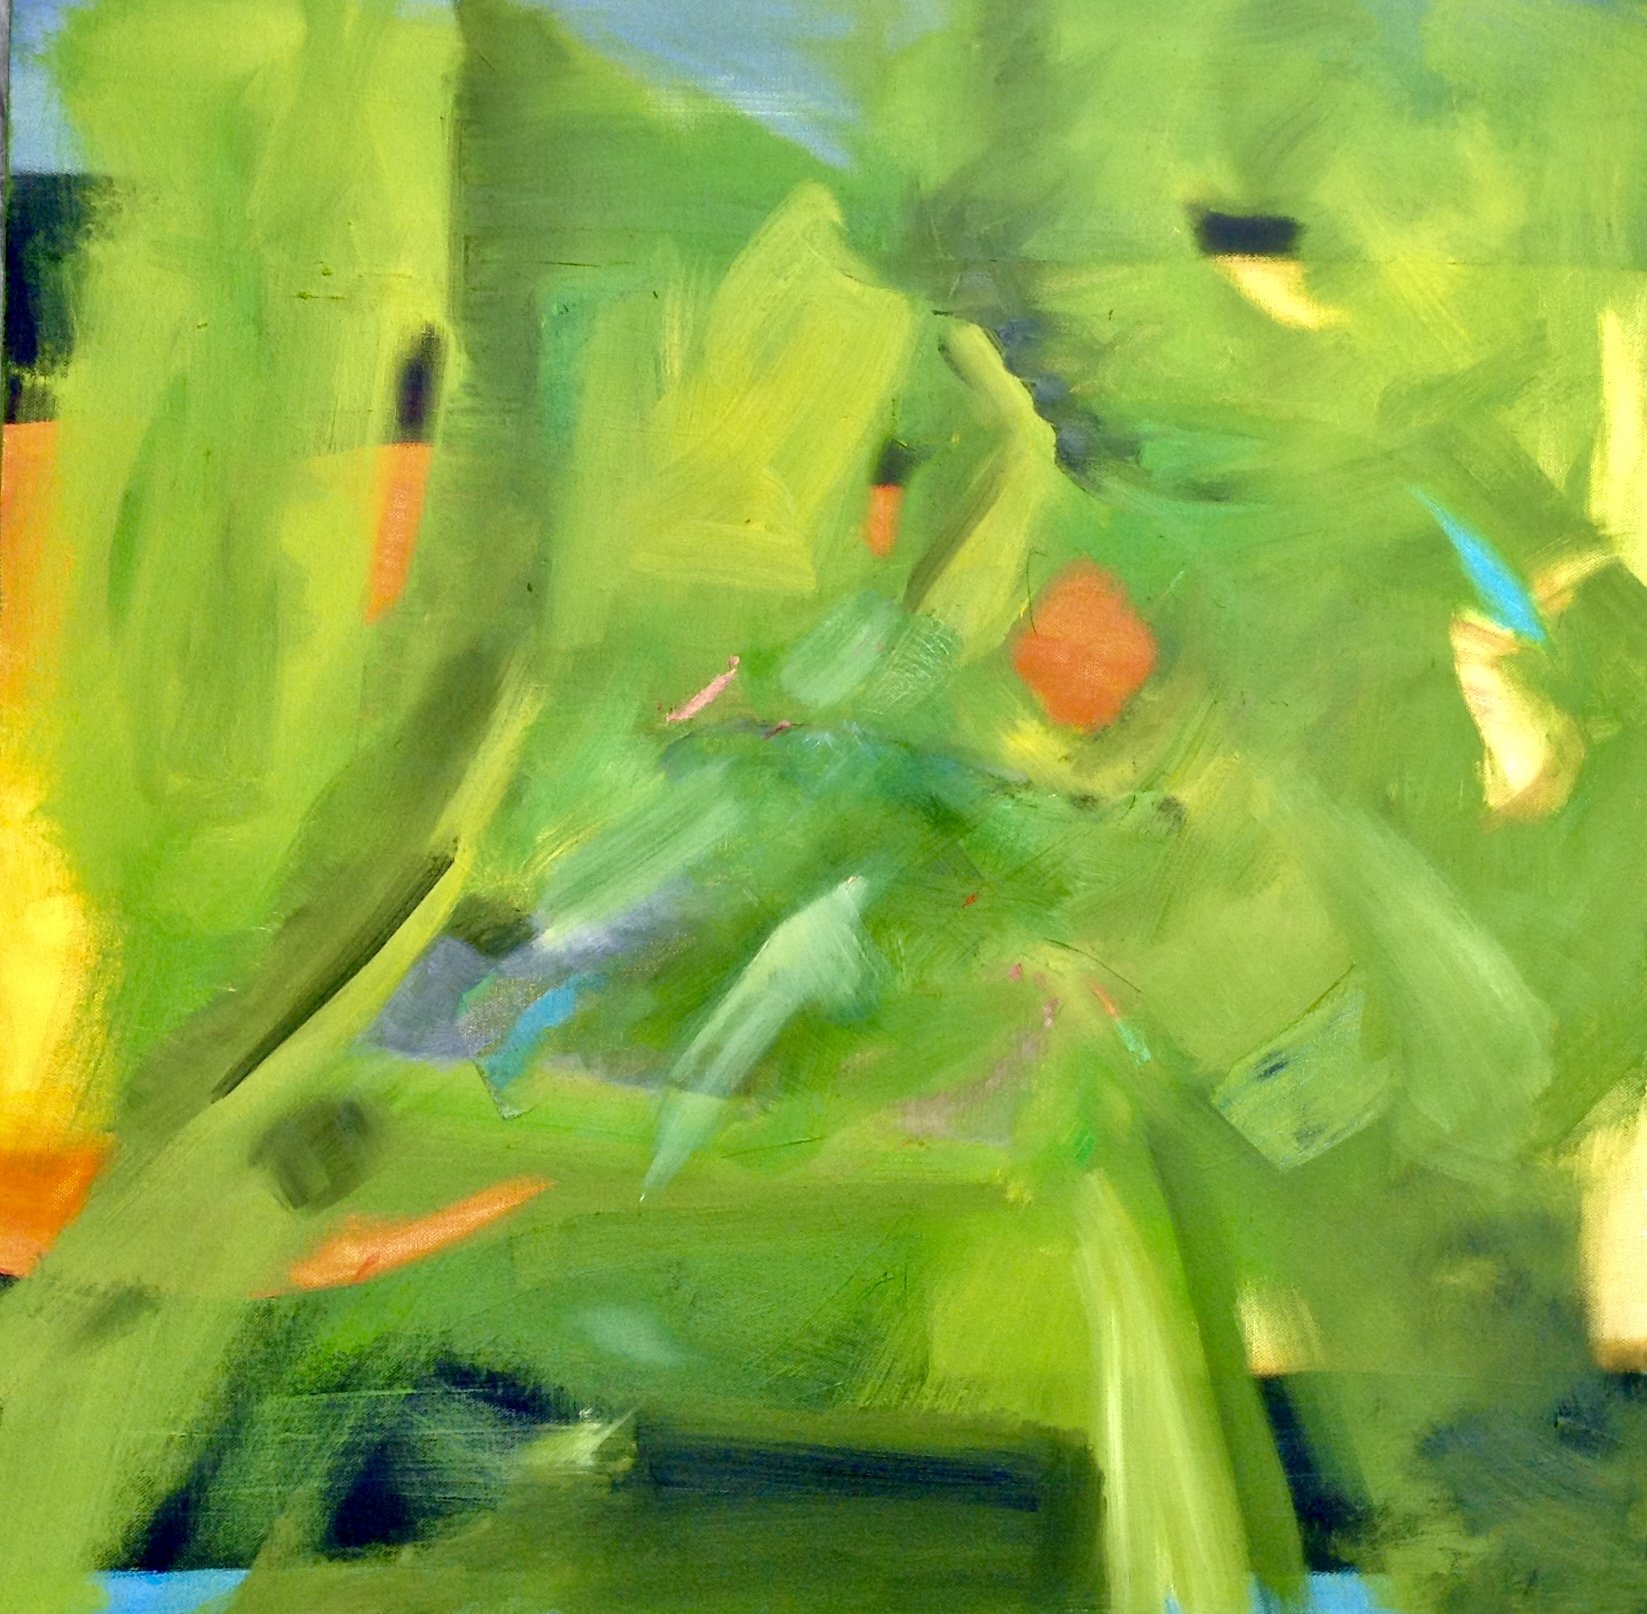    Green Oil  - oil on canvas, 2-foot square  